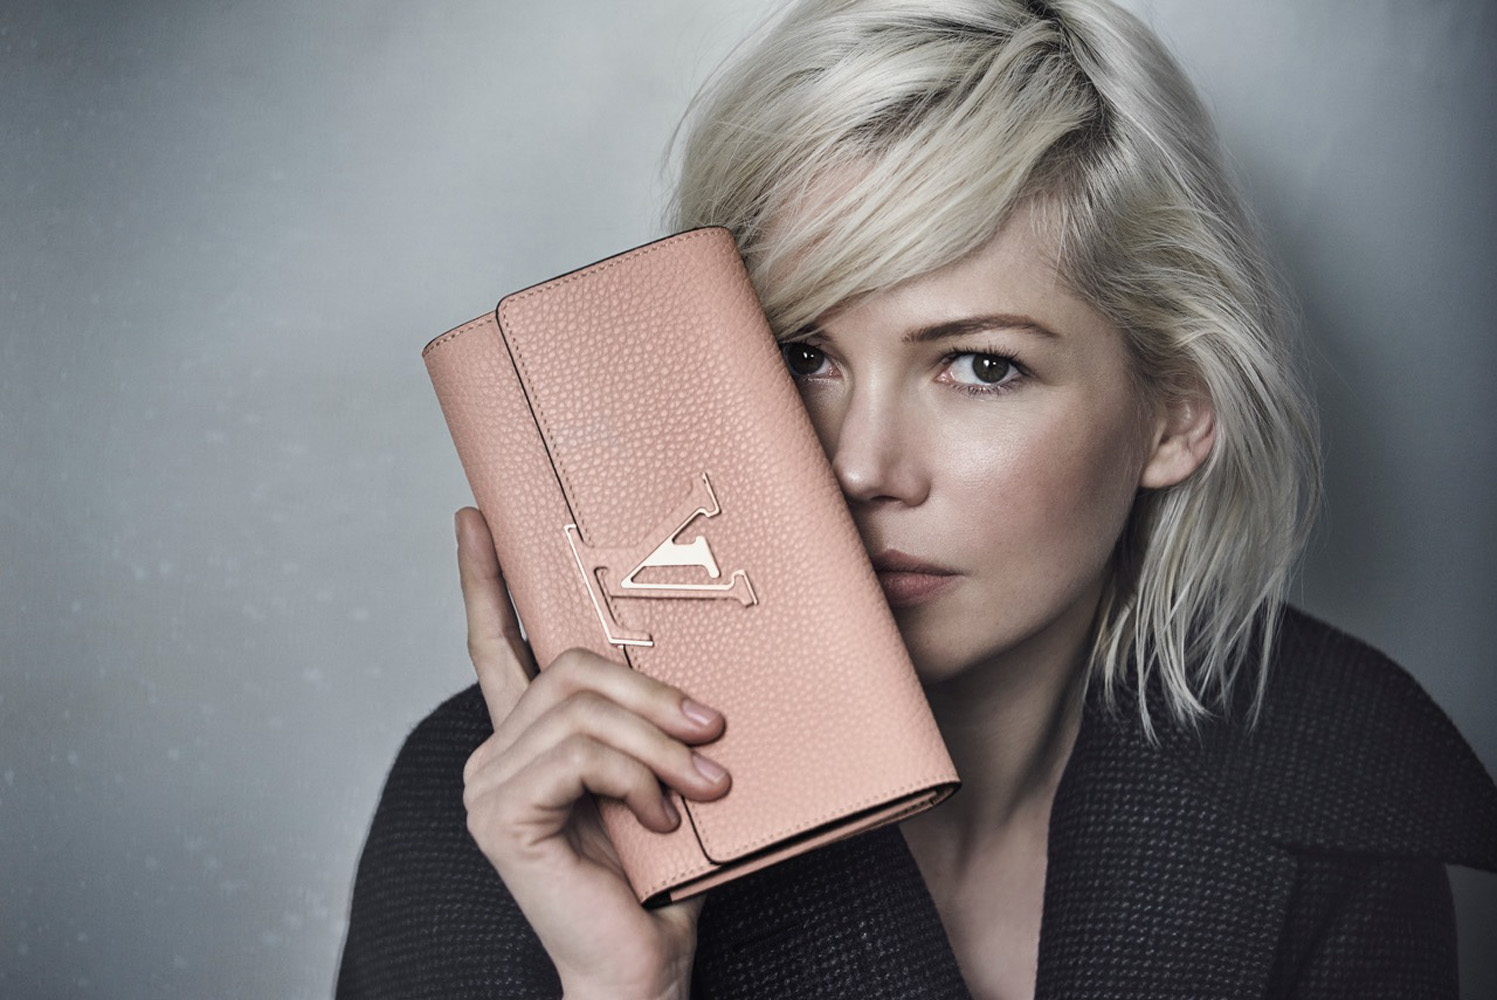 THE NEWEST LOUIS VUITTON HANDBAGS CAMPAIGN / WITH MICHELLE WILLIAMS - Arc  Street Journal